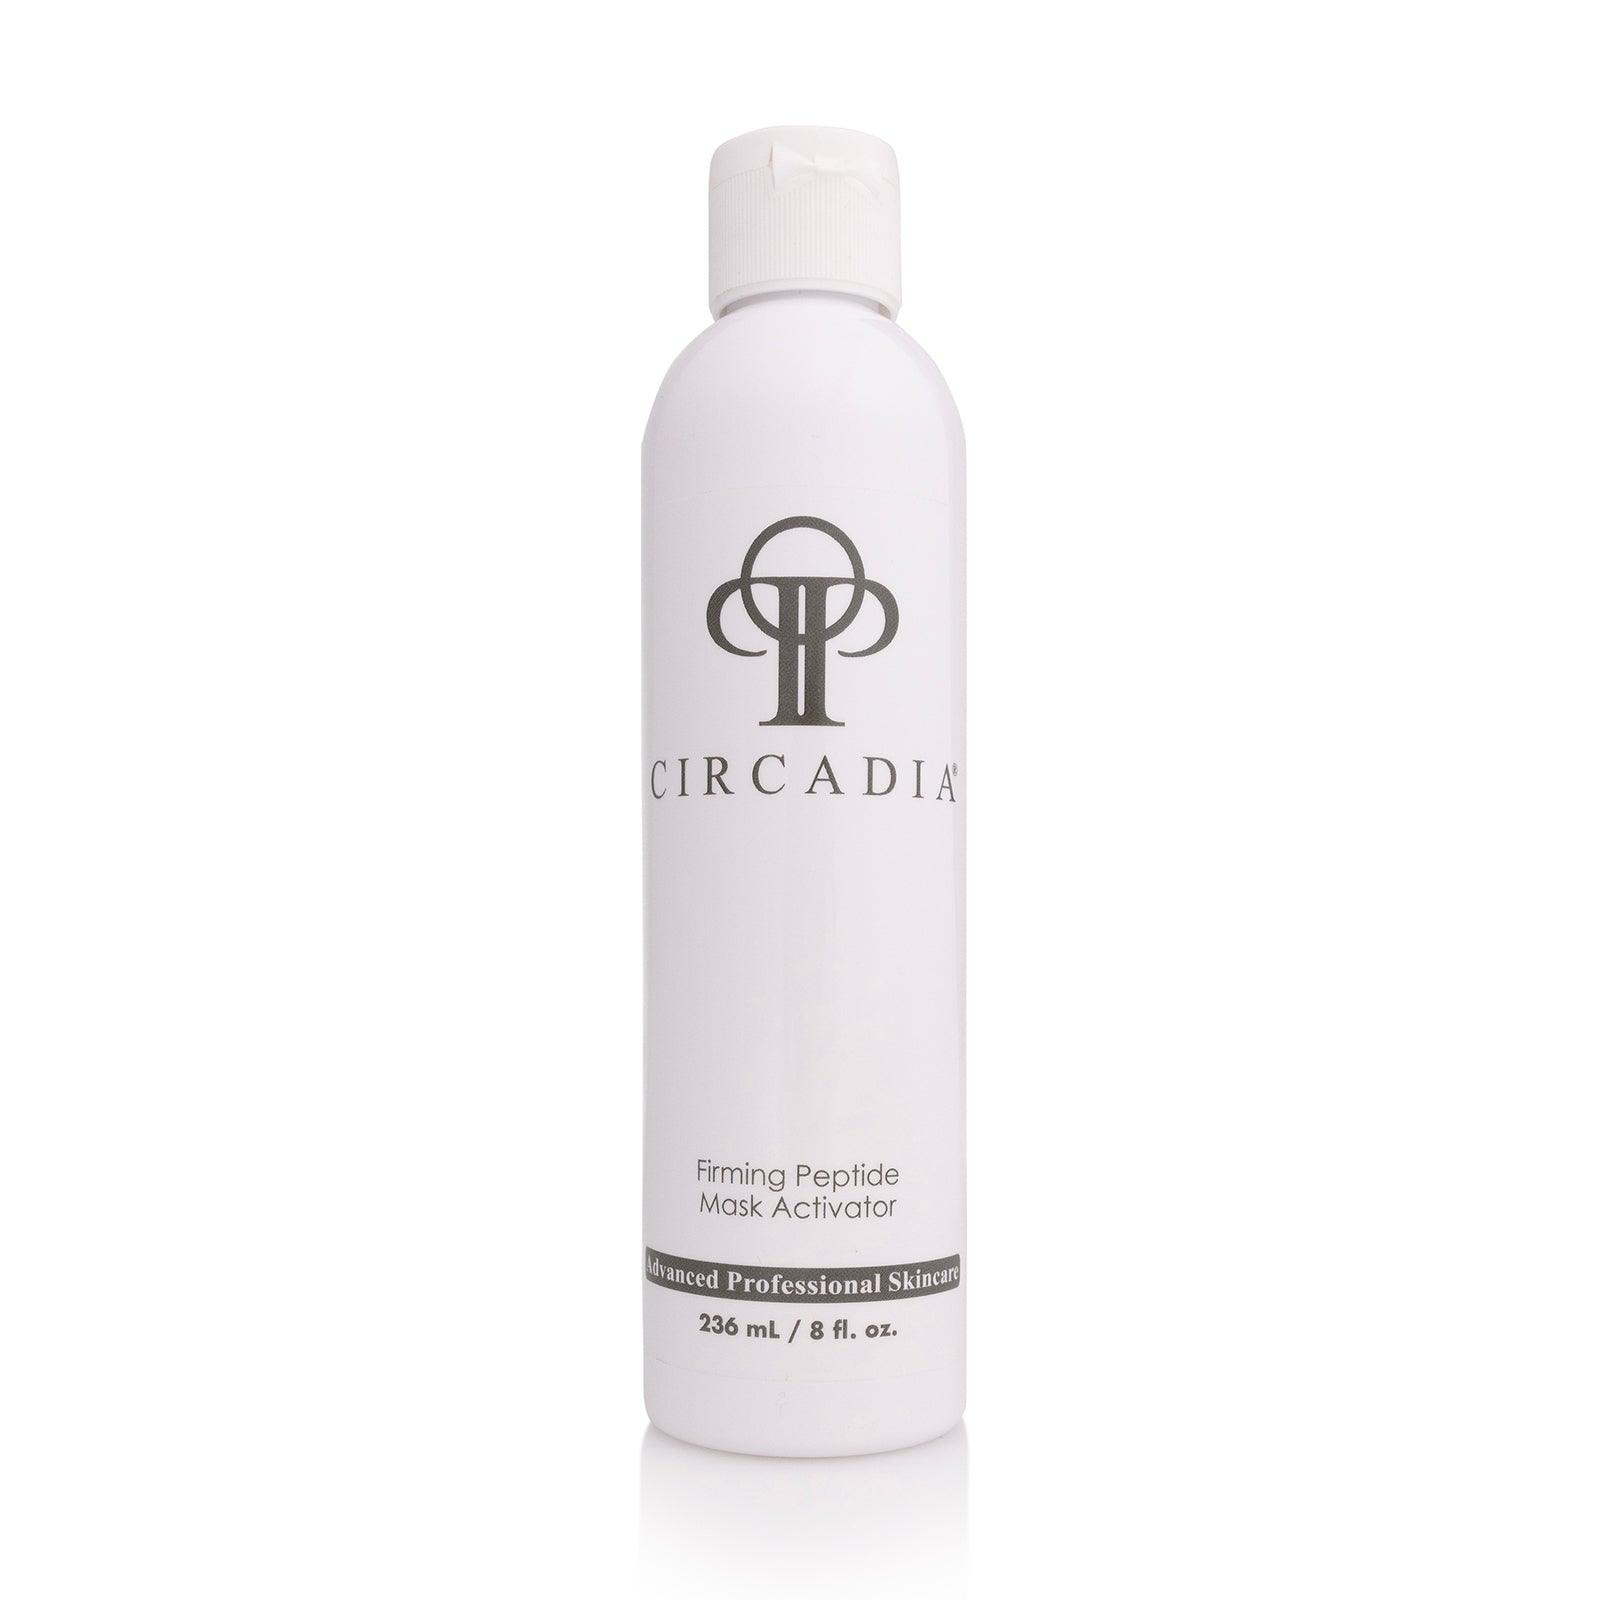 Firming Peptide Mask Activator - CIRCADIA